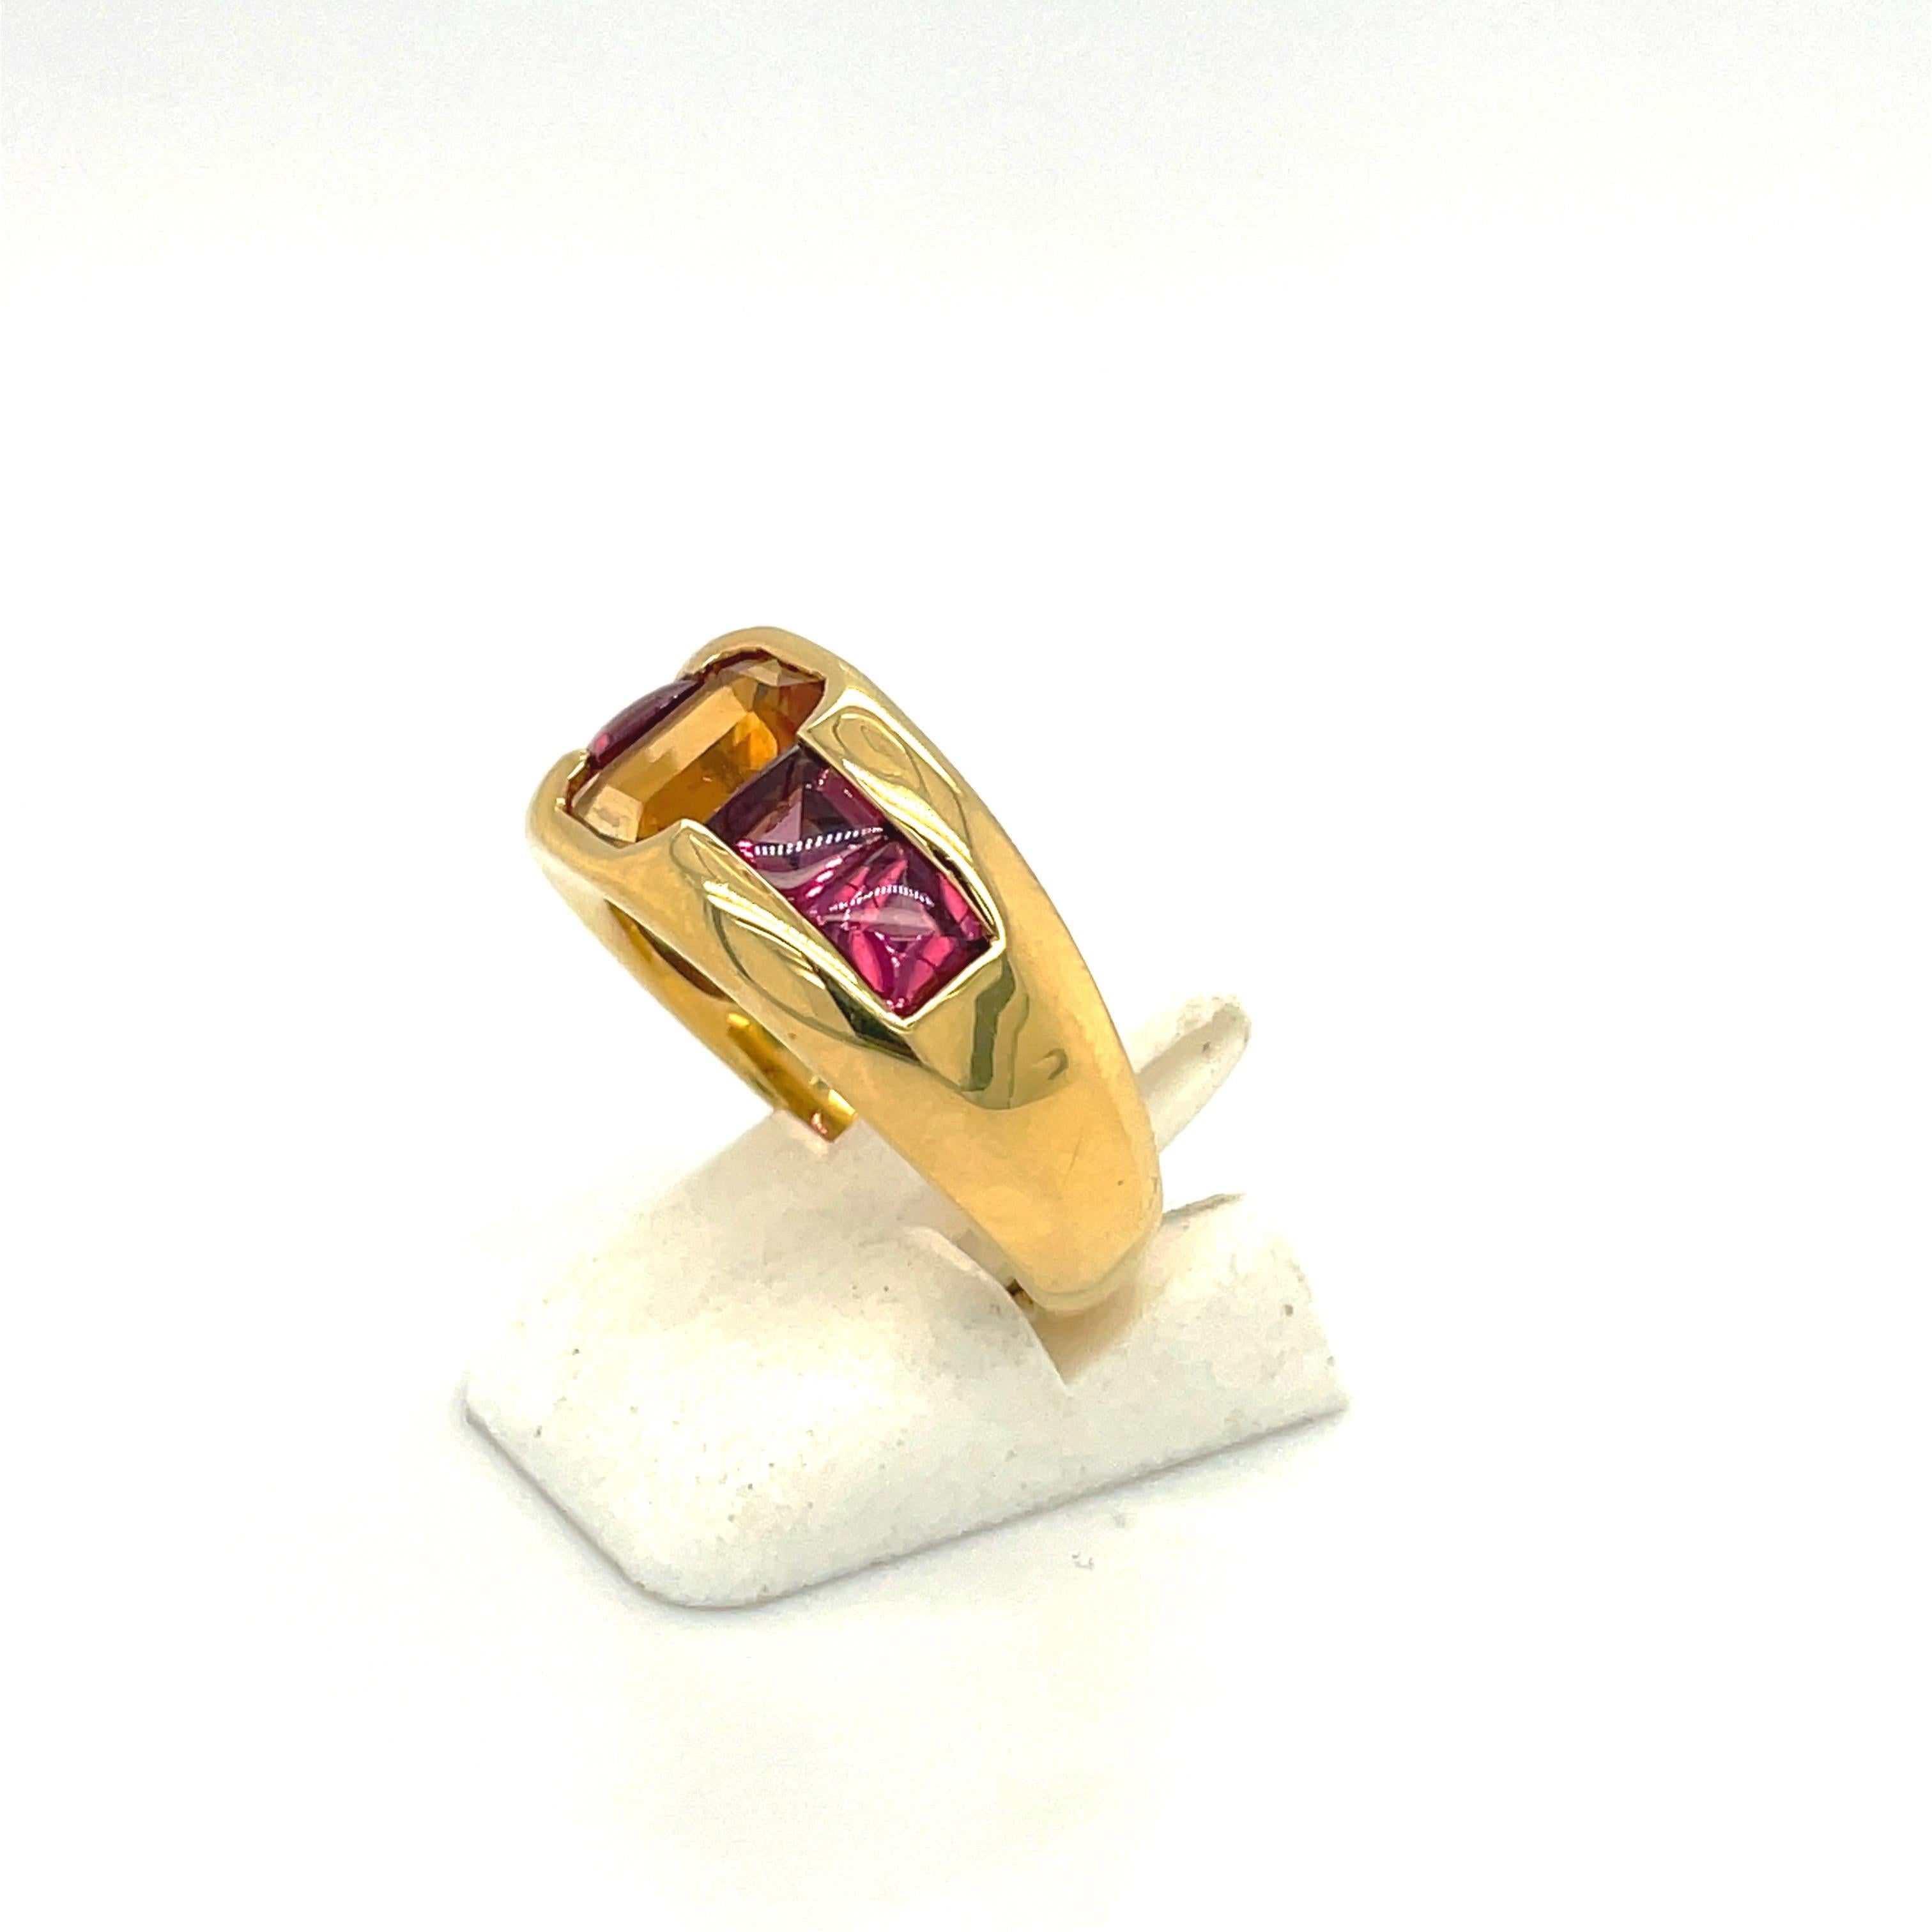 Designed by Gregg Ruth , this 18 karat yellow gold band style ring is set with an emerald cut citrine center stone. Four square cut rhodolite stones flank the center citrine in this happy and bright color combination ring.
Citrine=1.34